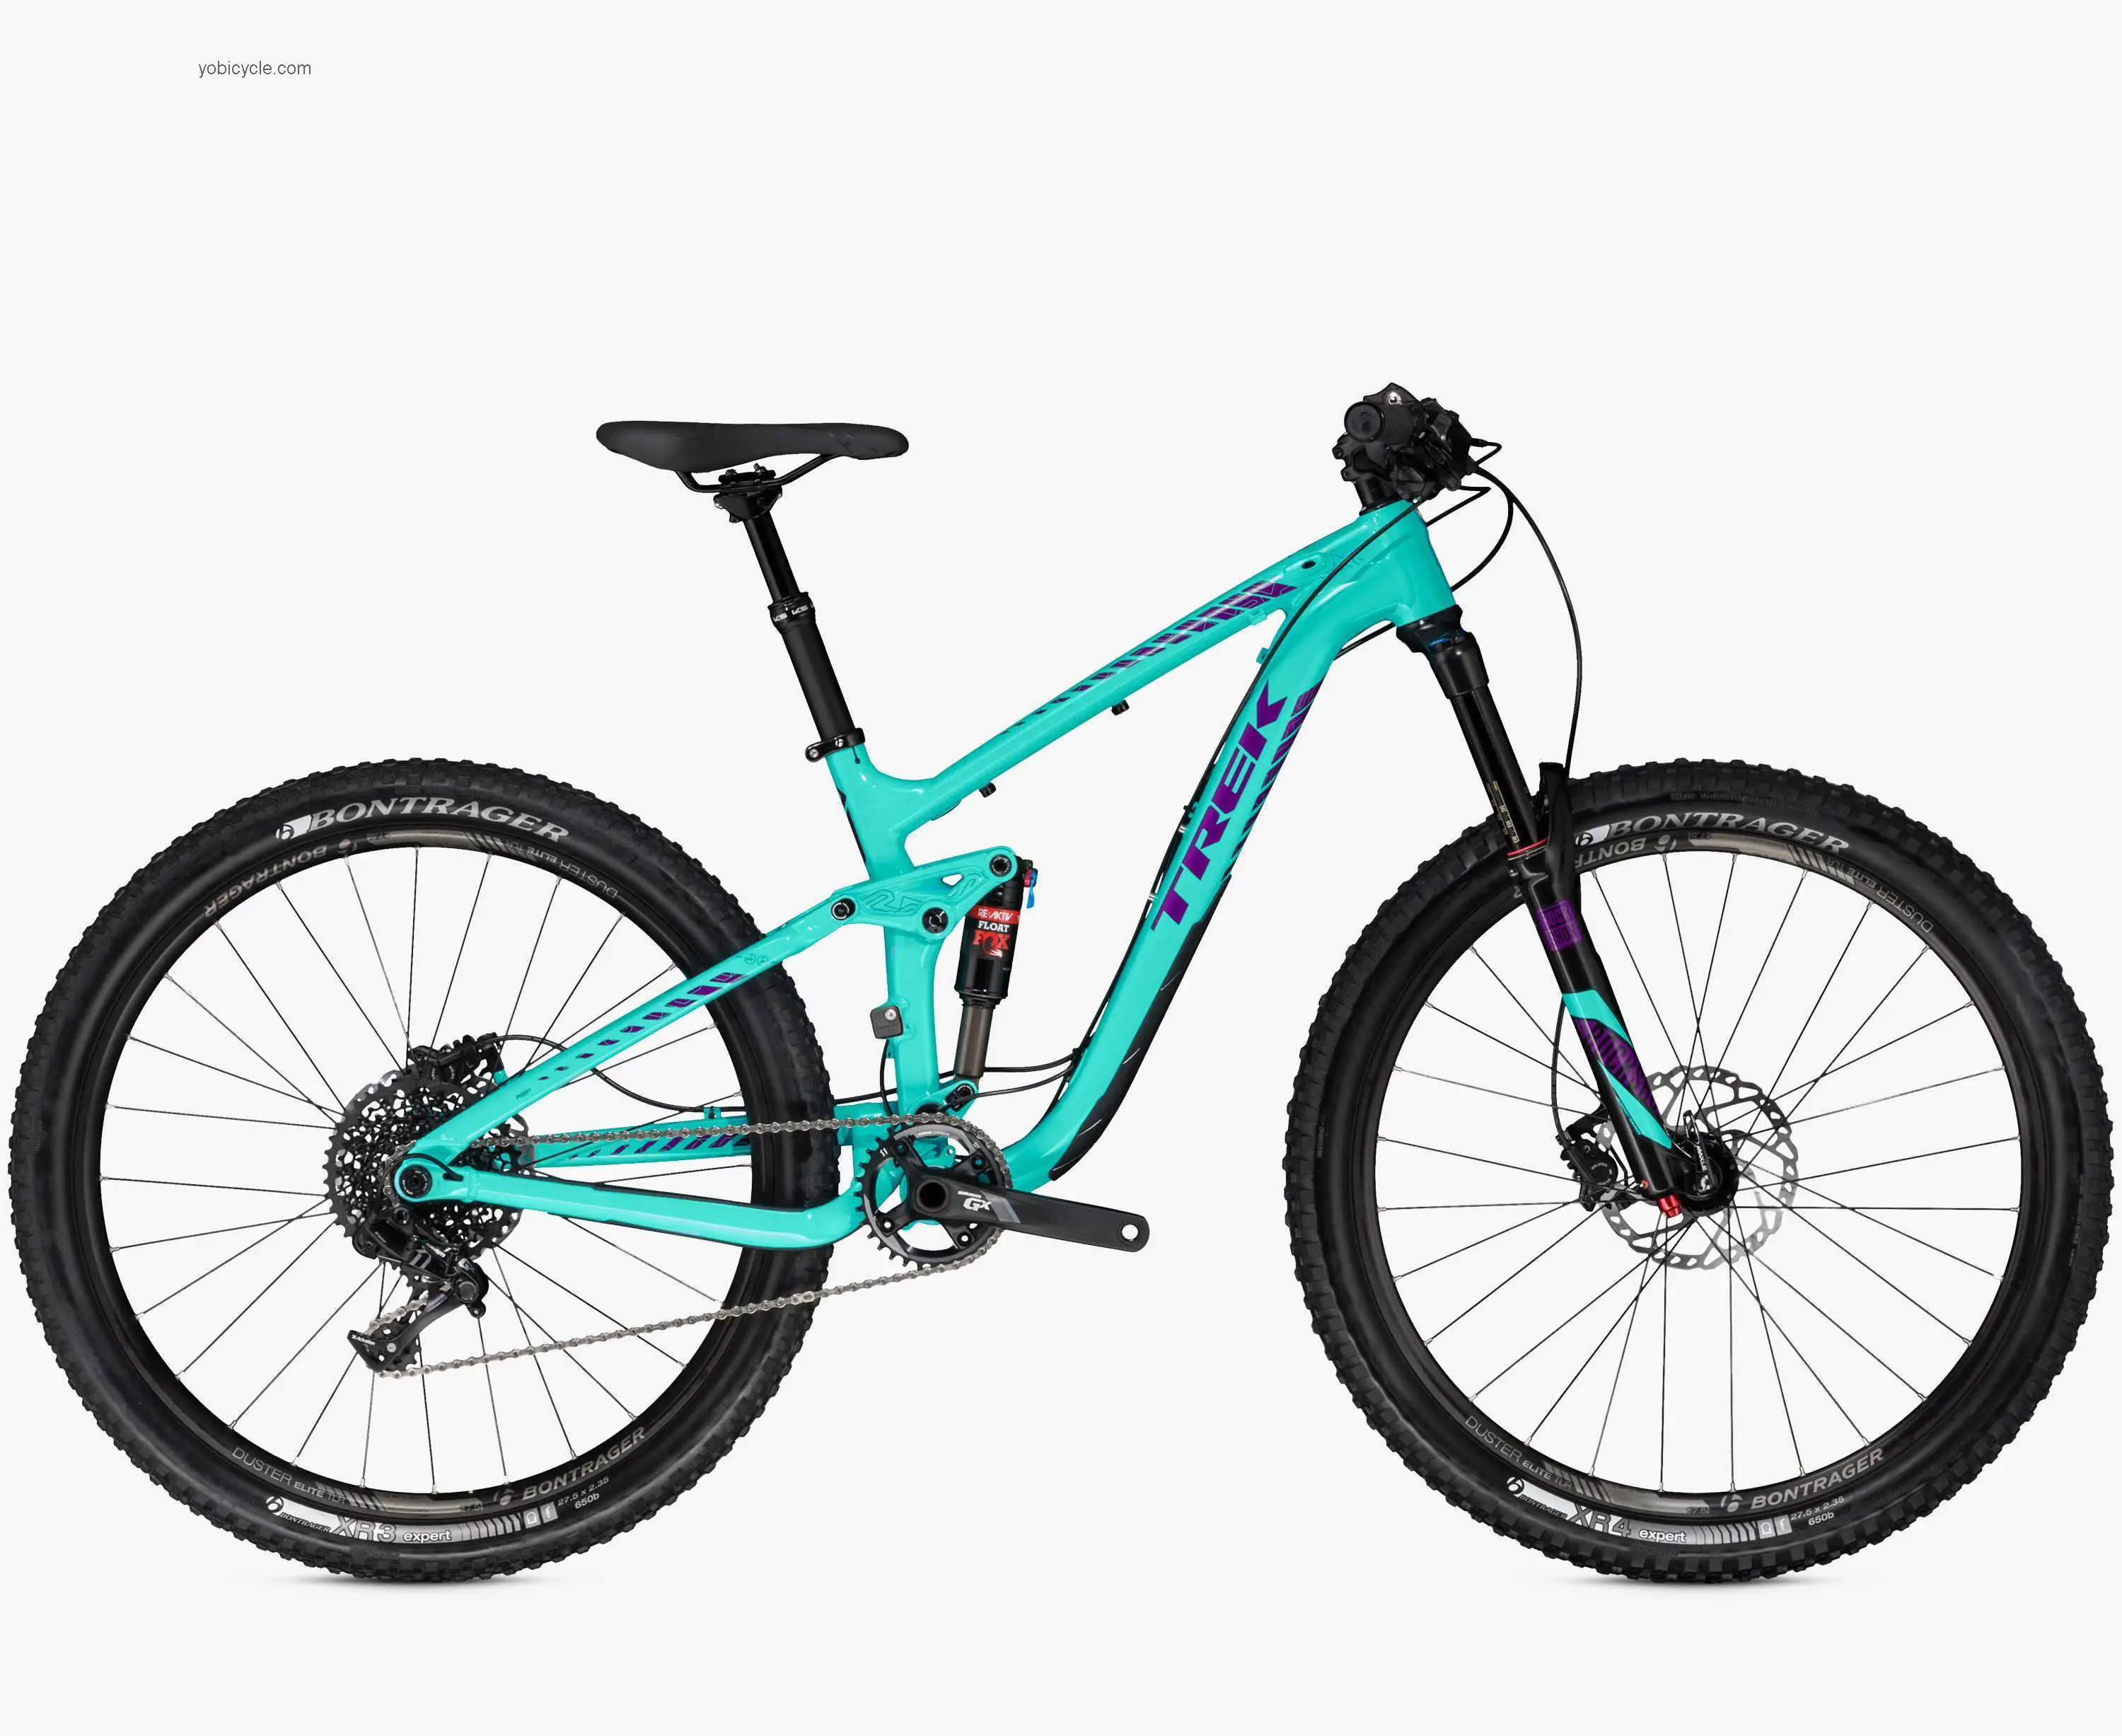 Trek Remedy 8 27.5 WSD 2016 comparison online with competitors